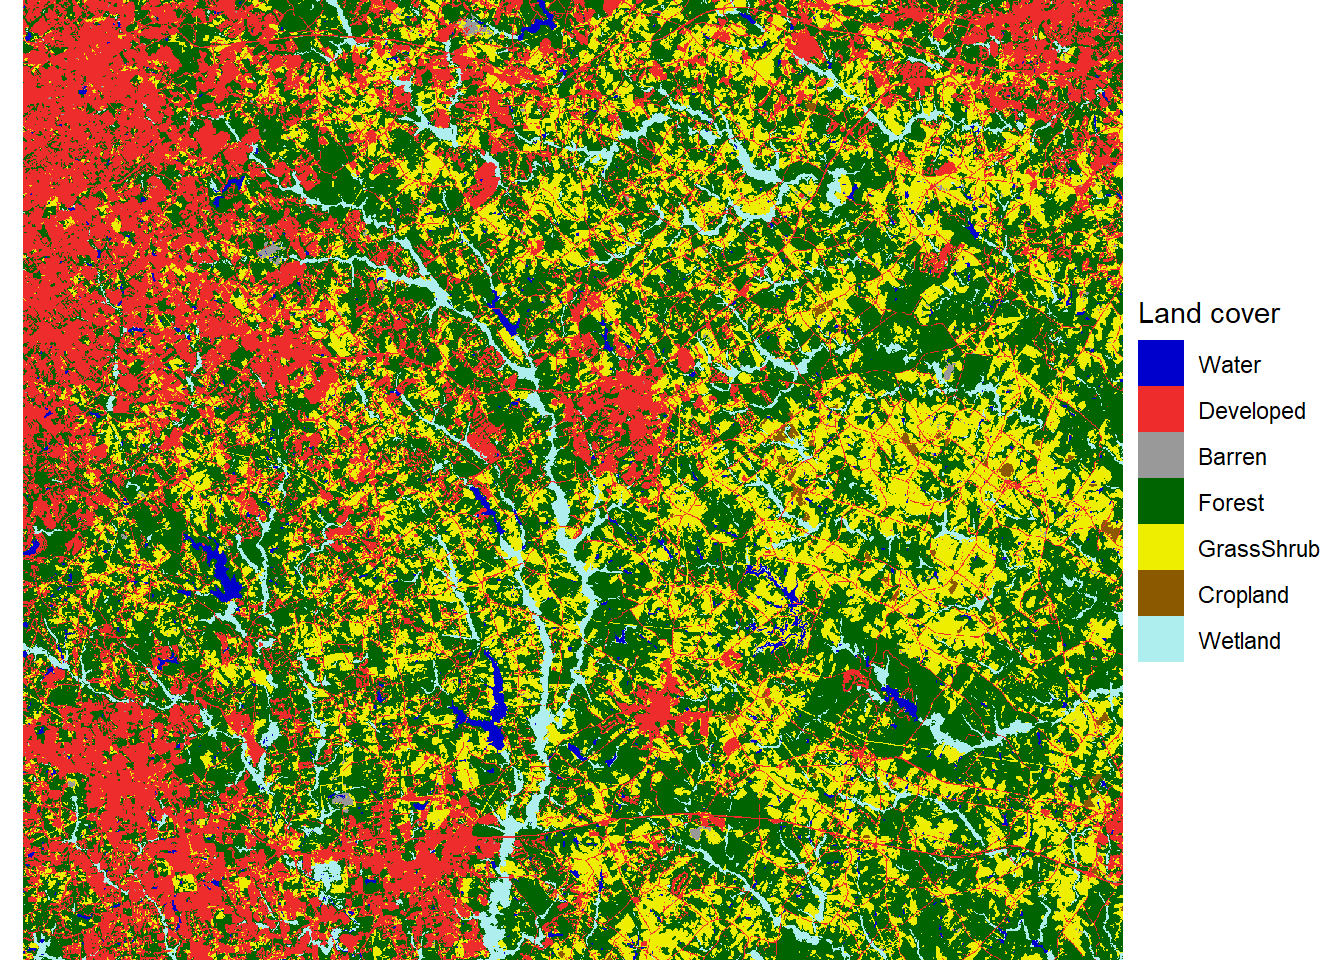 Land cover map with reclassified land cover types.